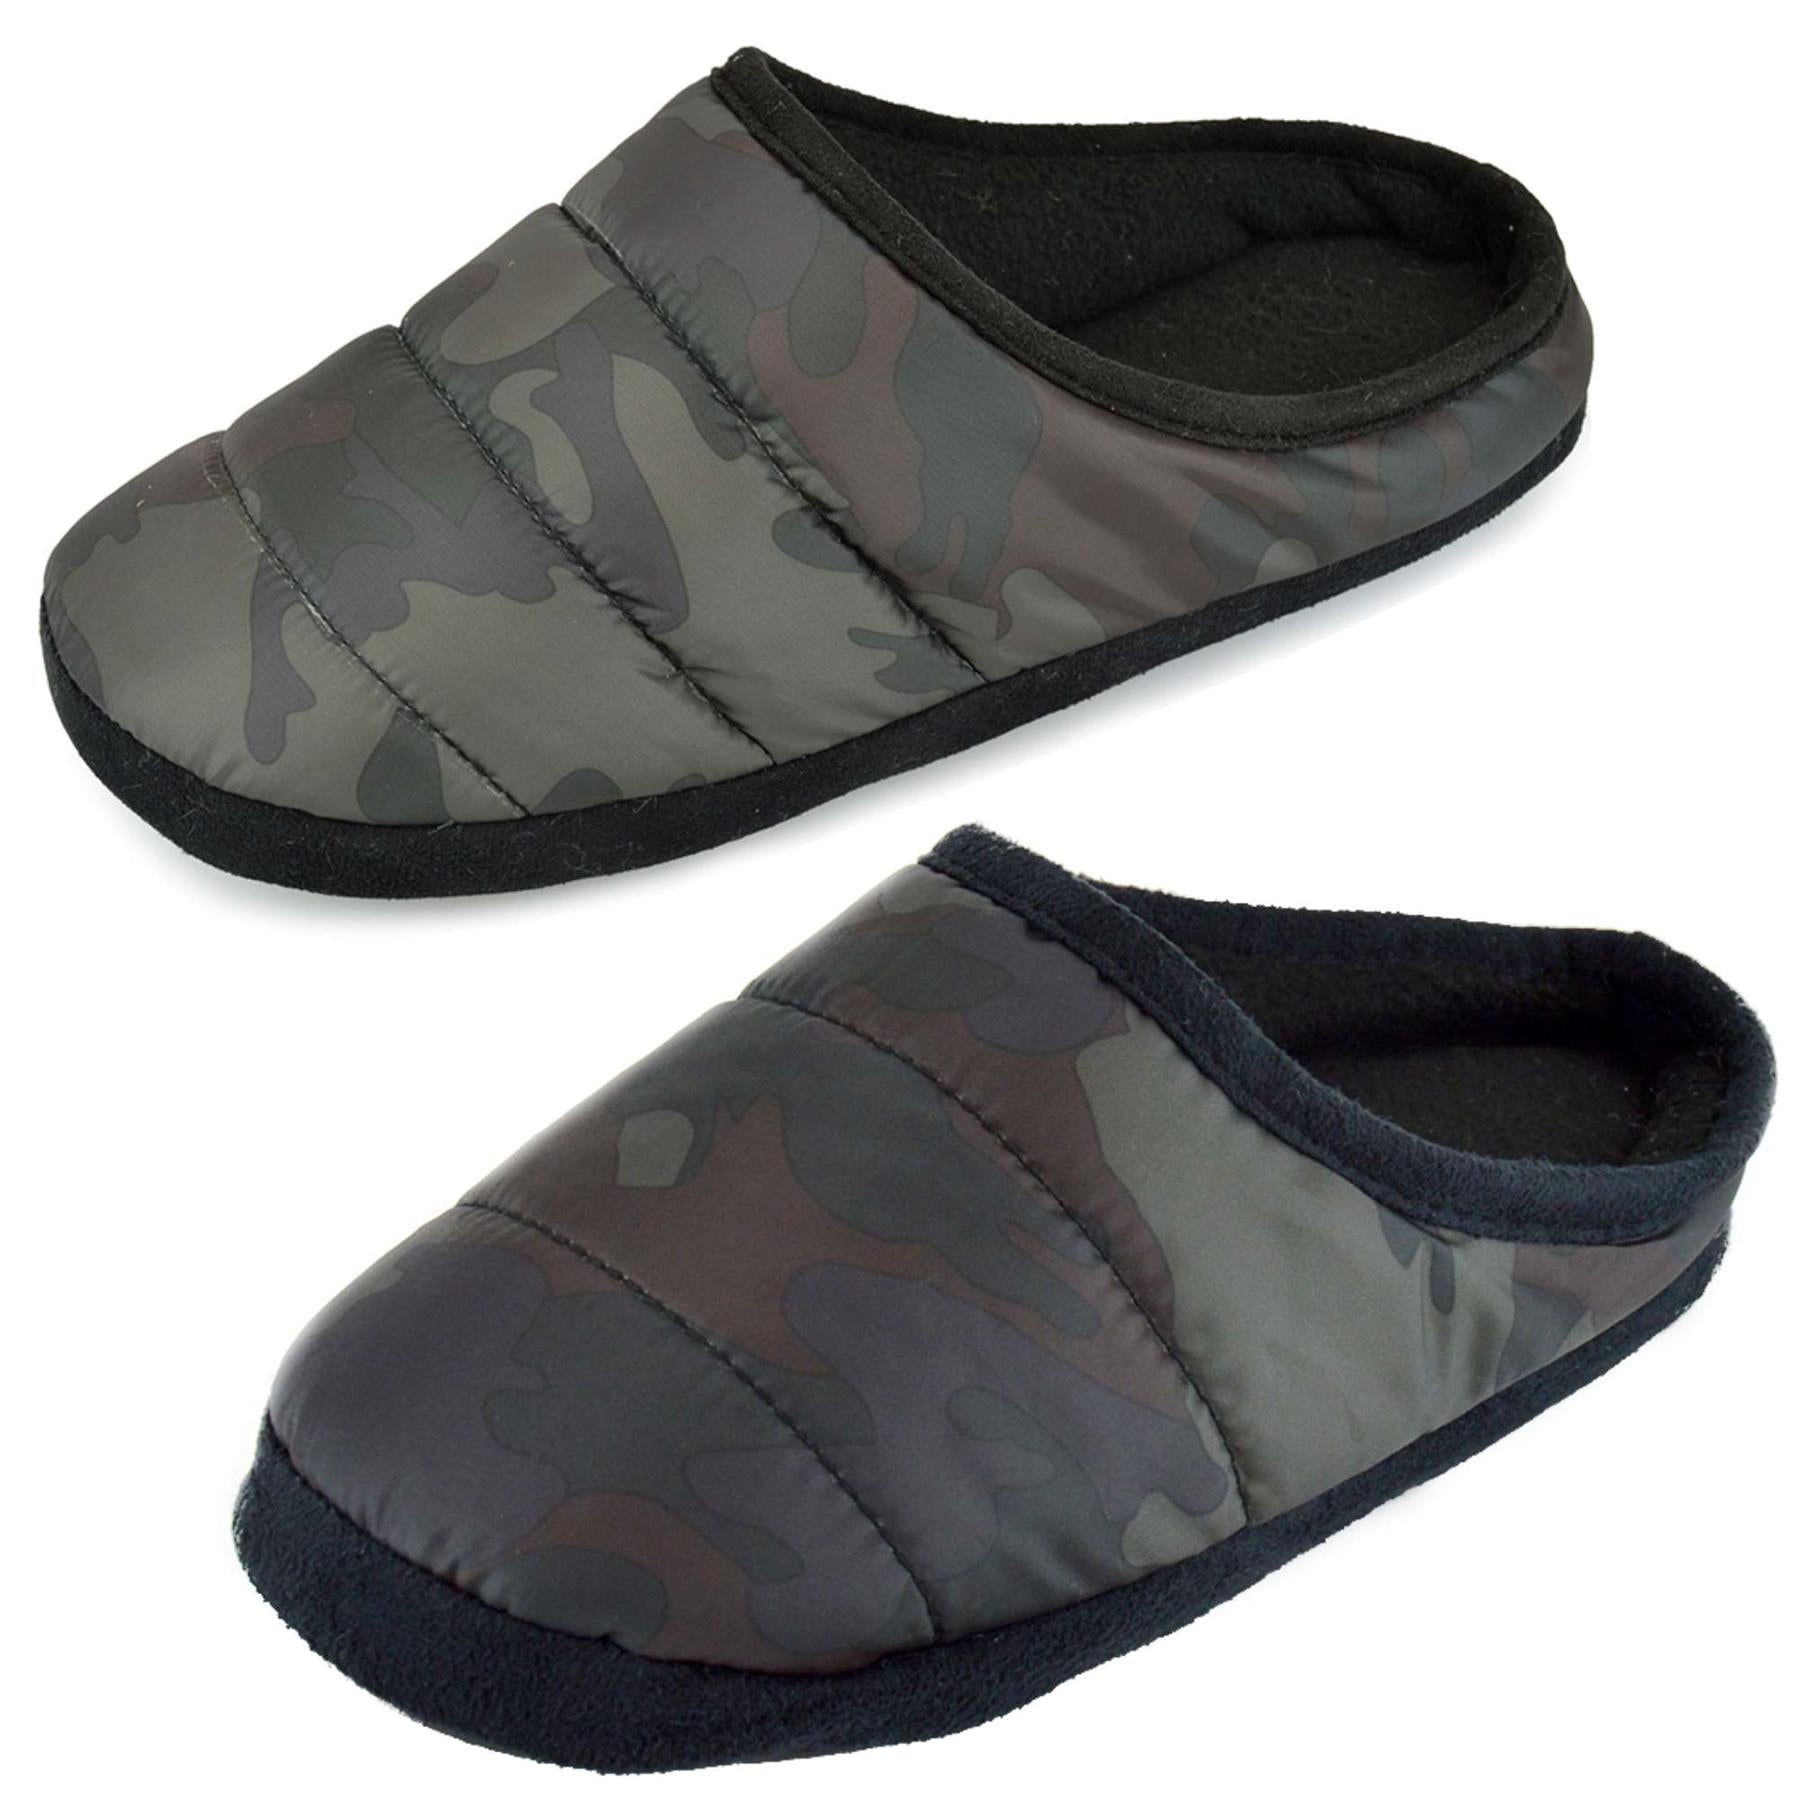 A2Z 4 Kids Girls Boys Camouflage Mule Slippers Quilted Puffa Slip-On House Shoes